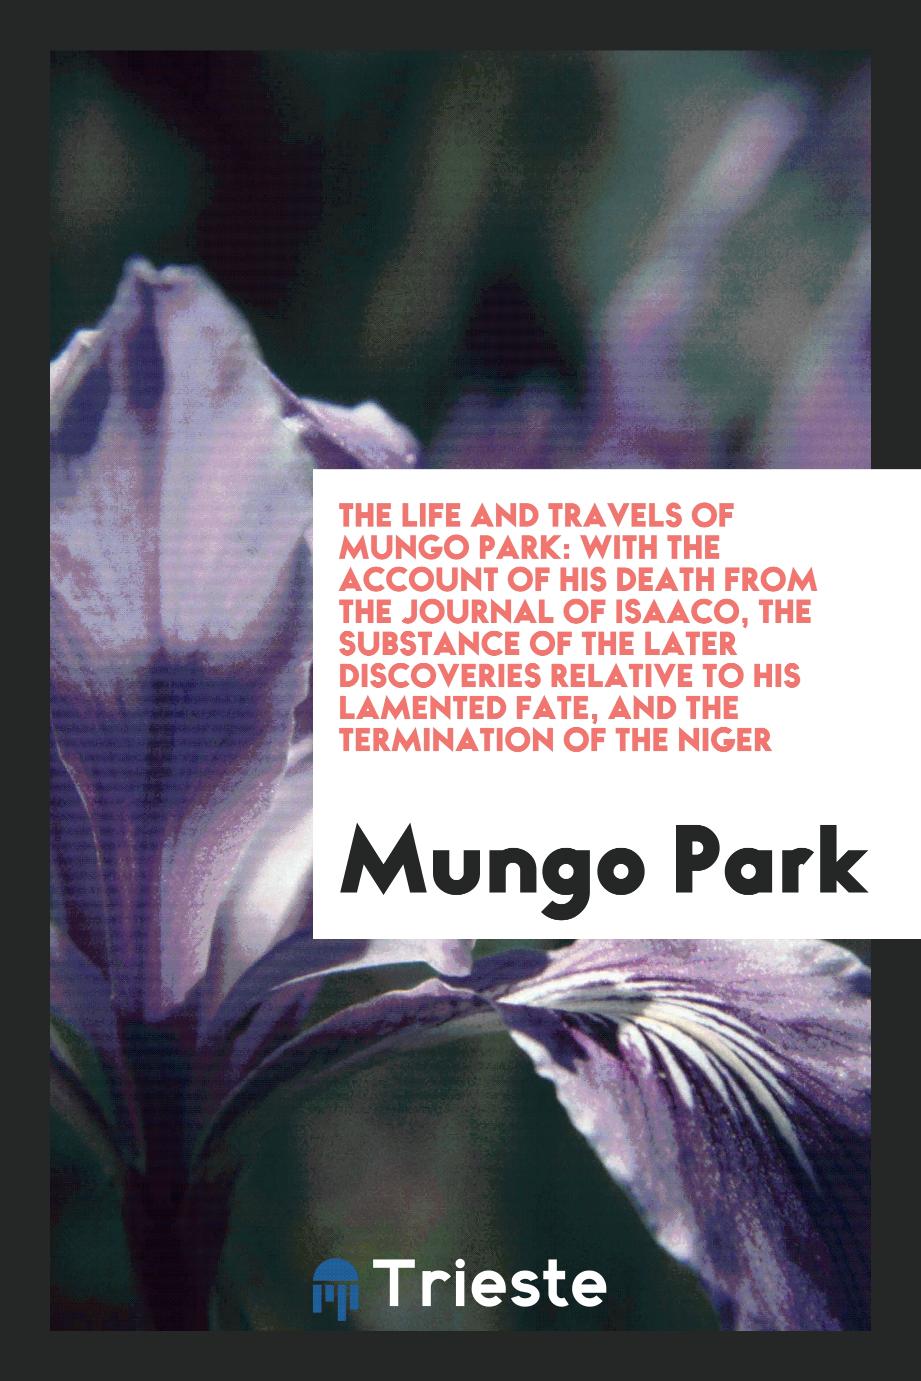 The Life and Travels of Mungo Park: With the Account of His Death from the Journal of Isaaco, the Substance of the Later Discoveries Relative to His Lamented Fate, and the Termination of the Niger